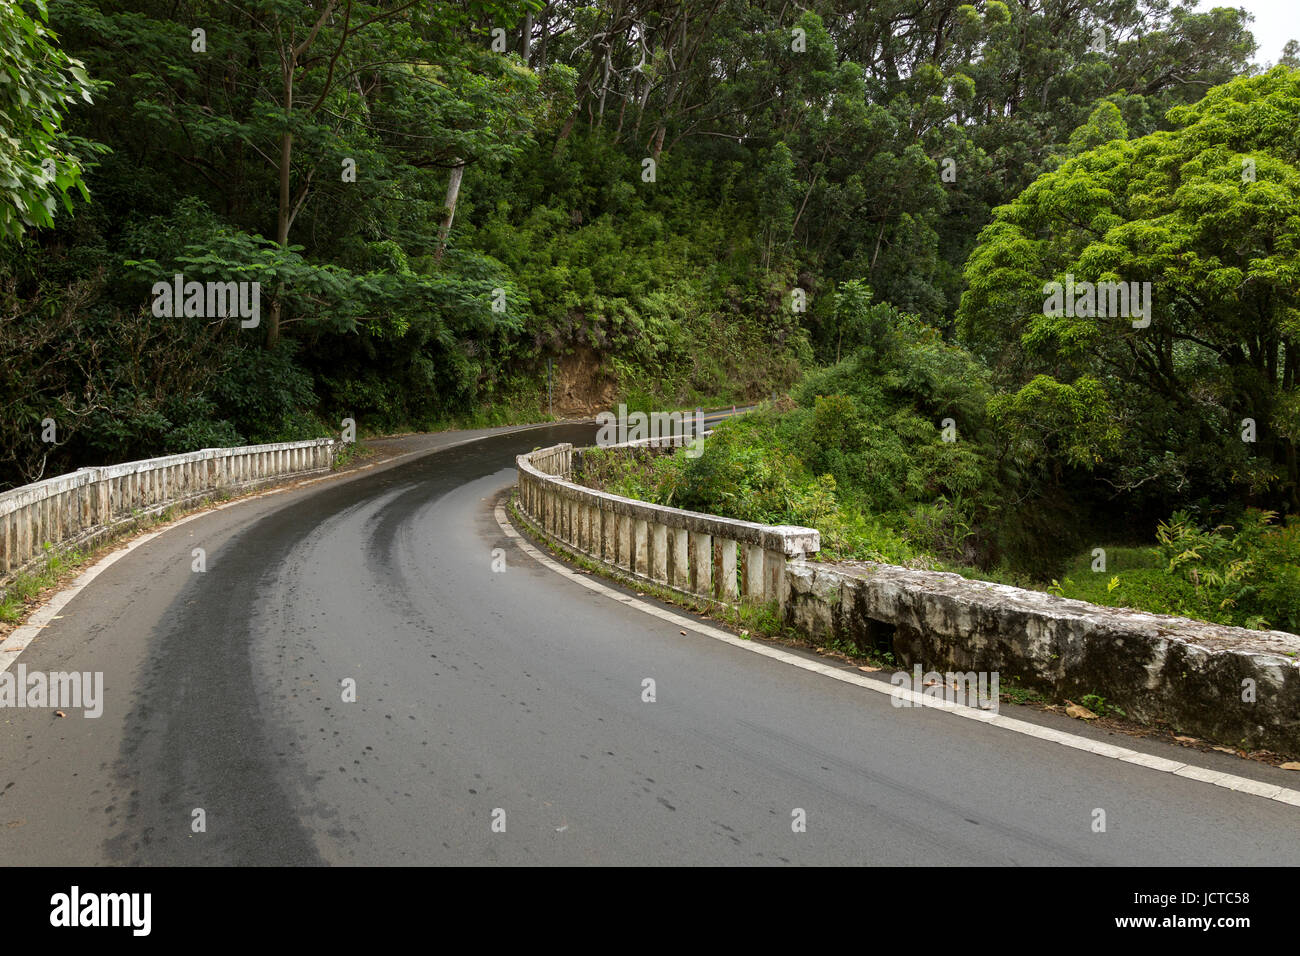 One of the many curves in the road on the Hana Highway. Stock Photo